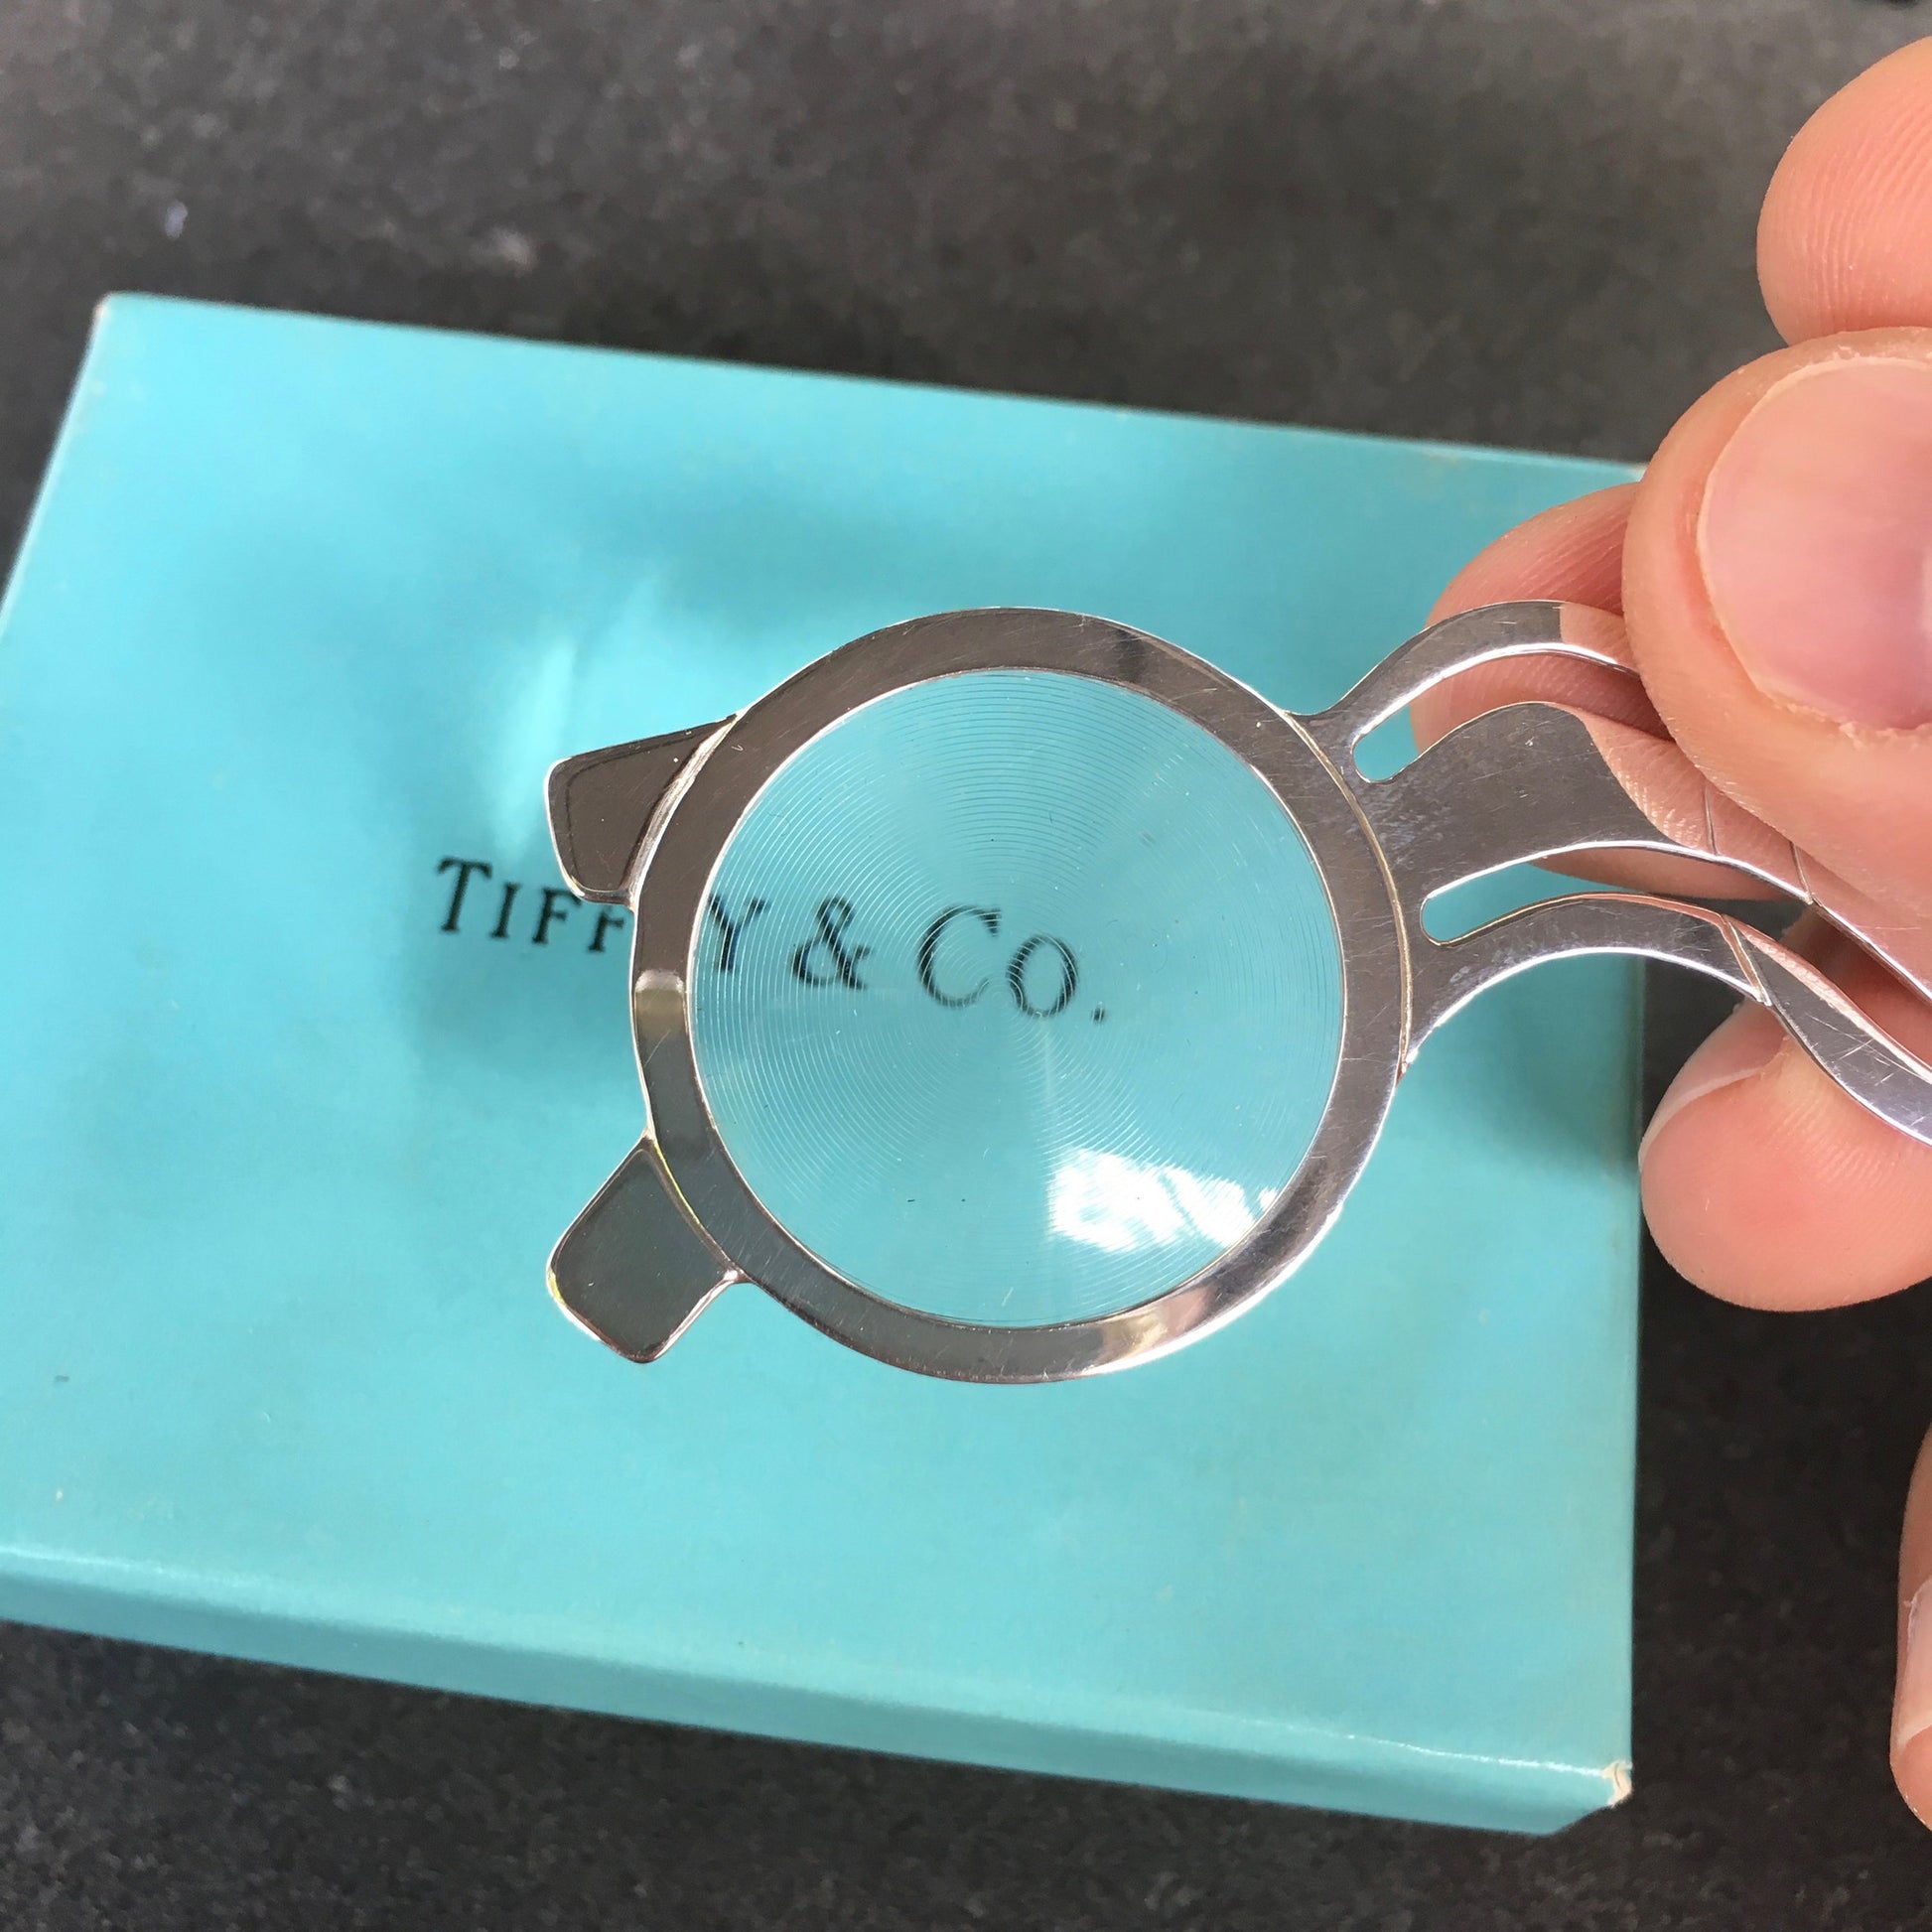 Tiffany & Co. Sterling Silver .925 Spectacles Eyeglasses Bookmark - Hashtag Watch Company